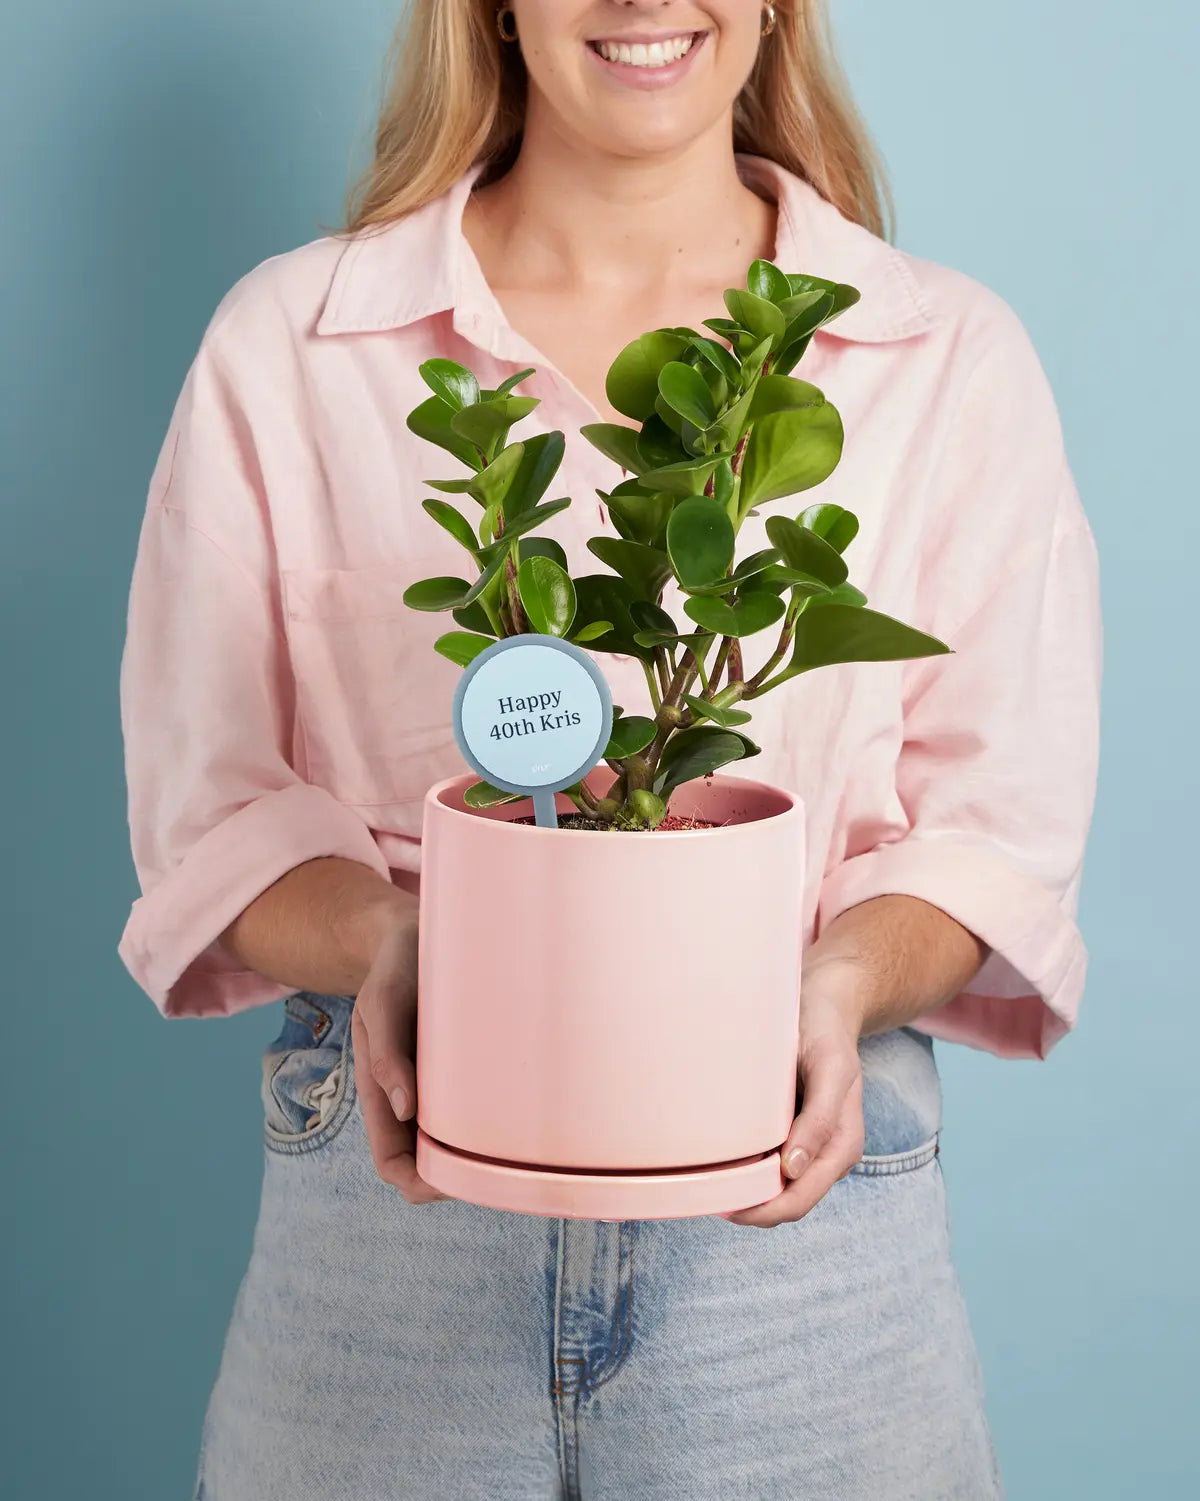 21 Best Plant Gifts For Friends And Family in 2021